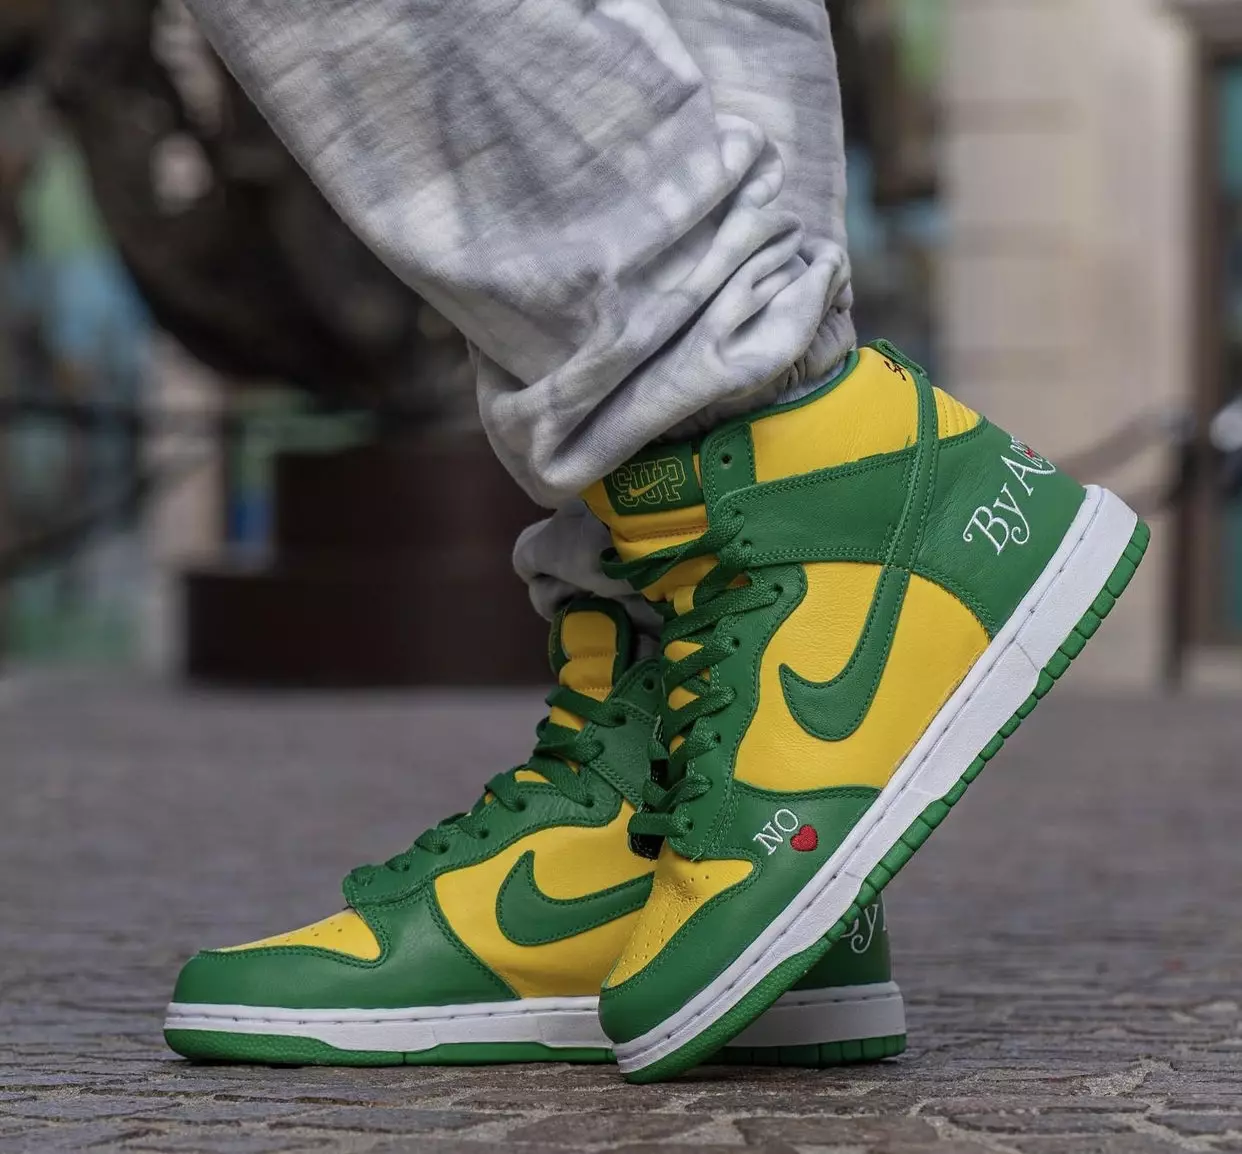 Supreme Nike SB Dunk High Brazil By Any Means DN3741-700 リリース日 On-Feet